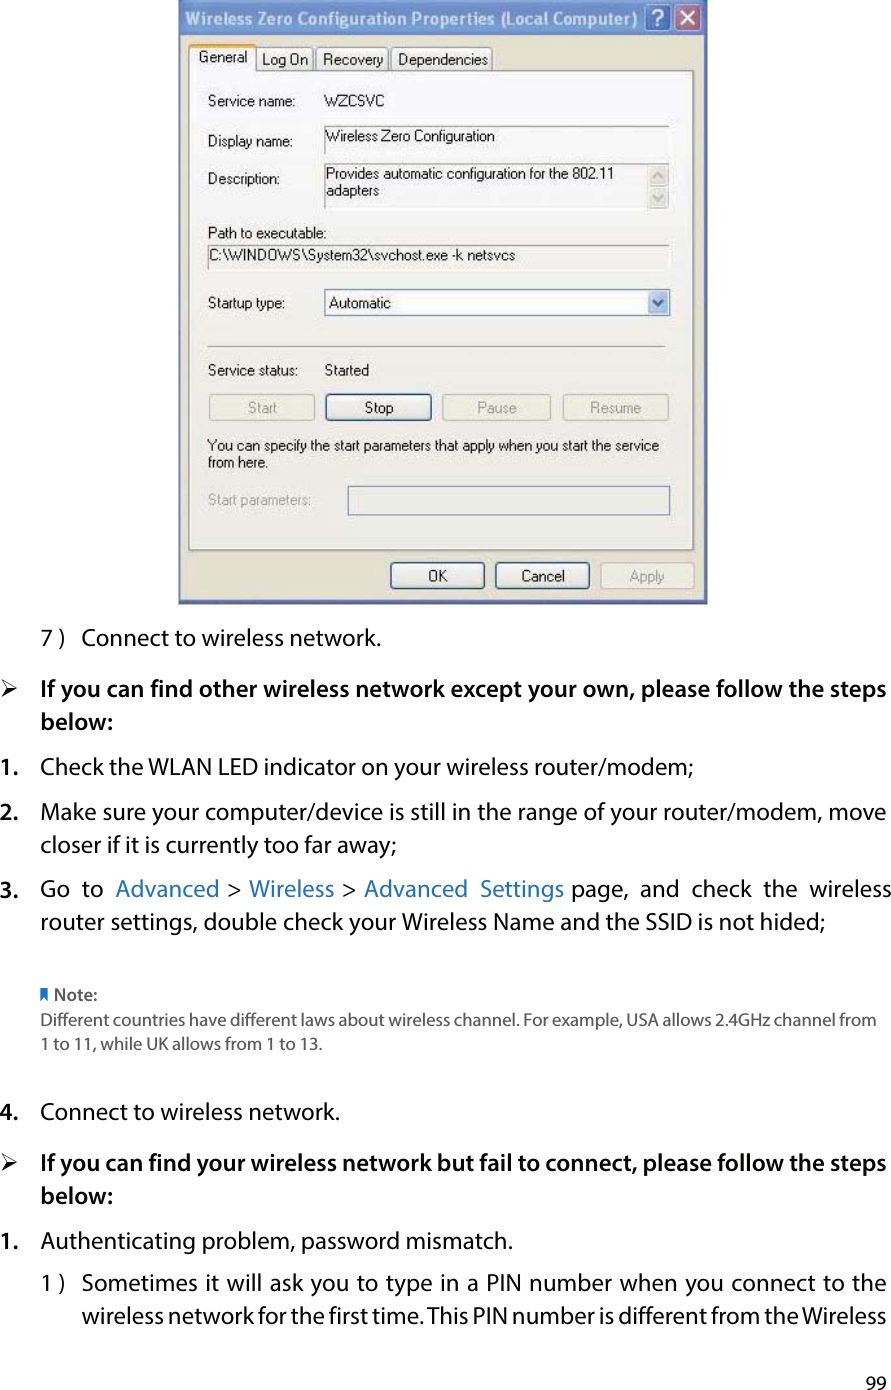 997 )  Connect to wireless network.¾If you can find other wireless network except your own, please follow the stepsbelow:1. Check the WLAN LED indicator on your wireless router/modem;2. Make sure your computer/device is still in the range of your router/modem, movecloser if it is currently too far away;3. Go to Advanced &gt; Wireless &gt; Advanced Settings page, and check the wireless router settings, double check your Wireless Name and the SSID is not hided;Note: Different countries have different laws about wireless channel. For example, USA allows 2.4GHz channel from 1 to 11, while UK allows from 1 to 13.4. Connect to wireless network.¾If you can find your wireless network but fail to connect, please follow the stepsbelow:1. Authenticating problem, password mismatch.1 )  Sometimes it will ask you to type in a PIN number when you connect to thewireless network for the first time. This PIN number is different from the Wireless 